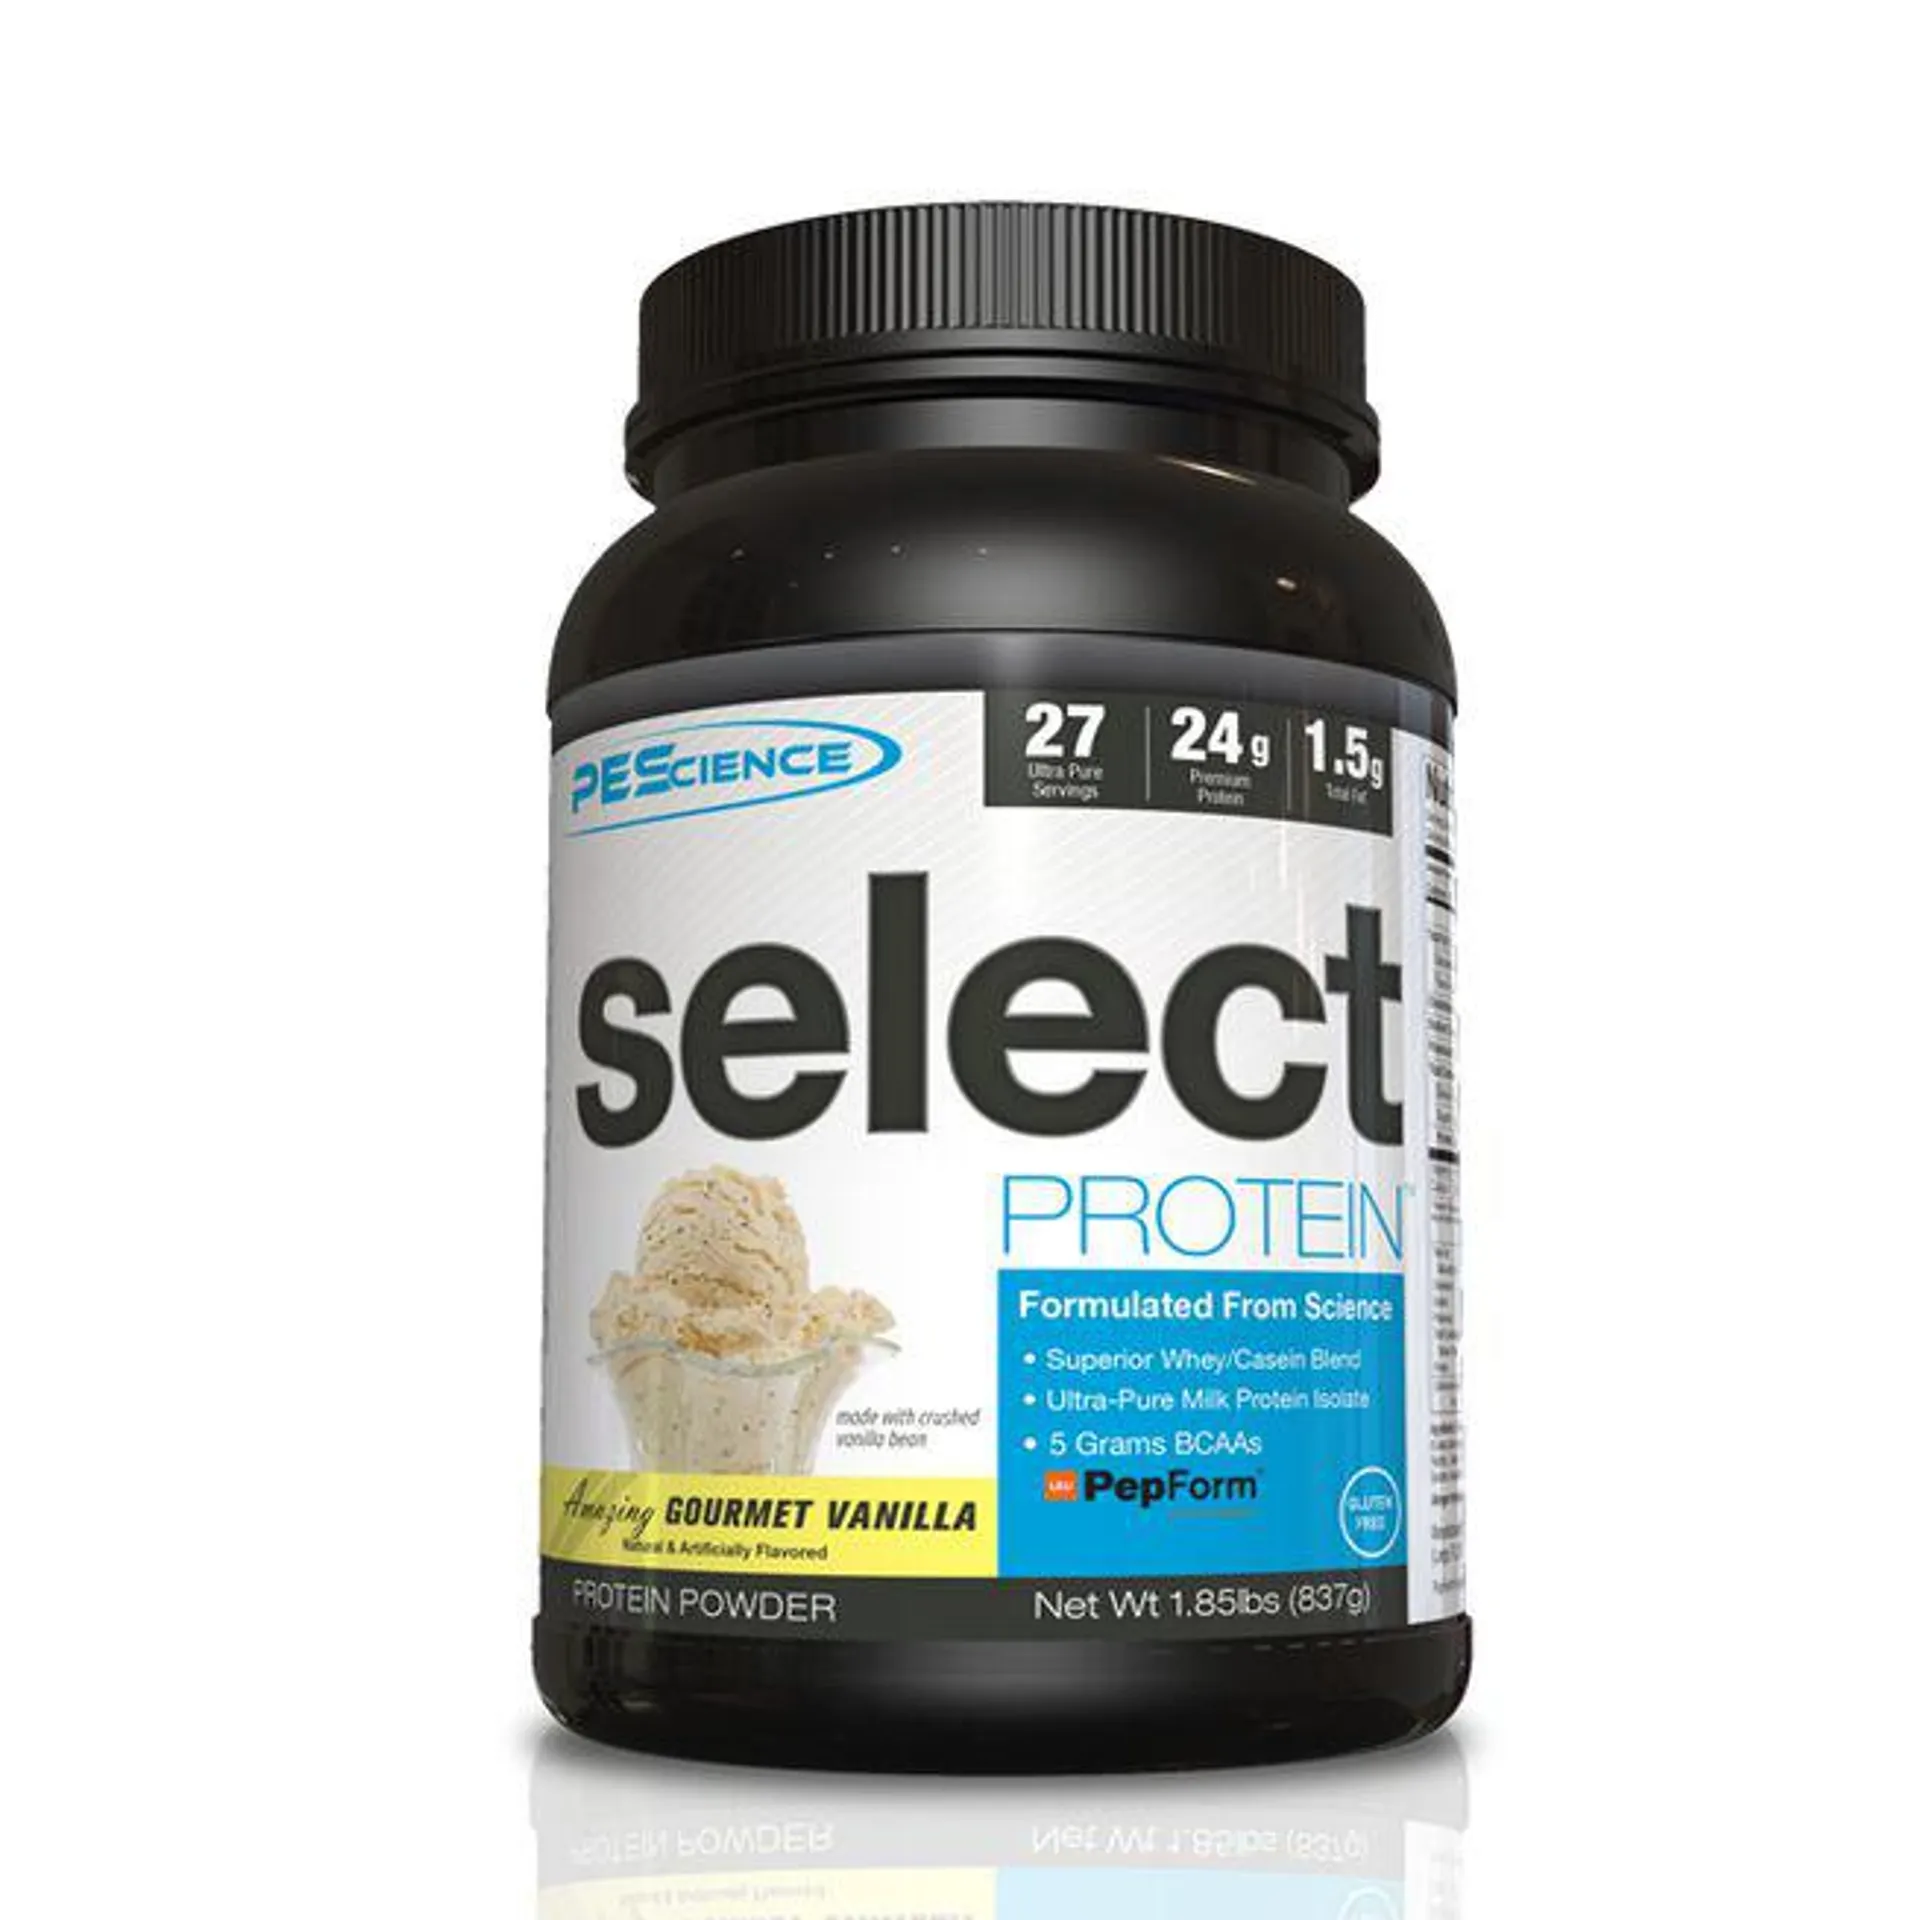 Select Protein, 27 servings Peanut Butter Cup